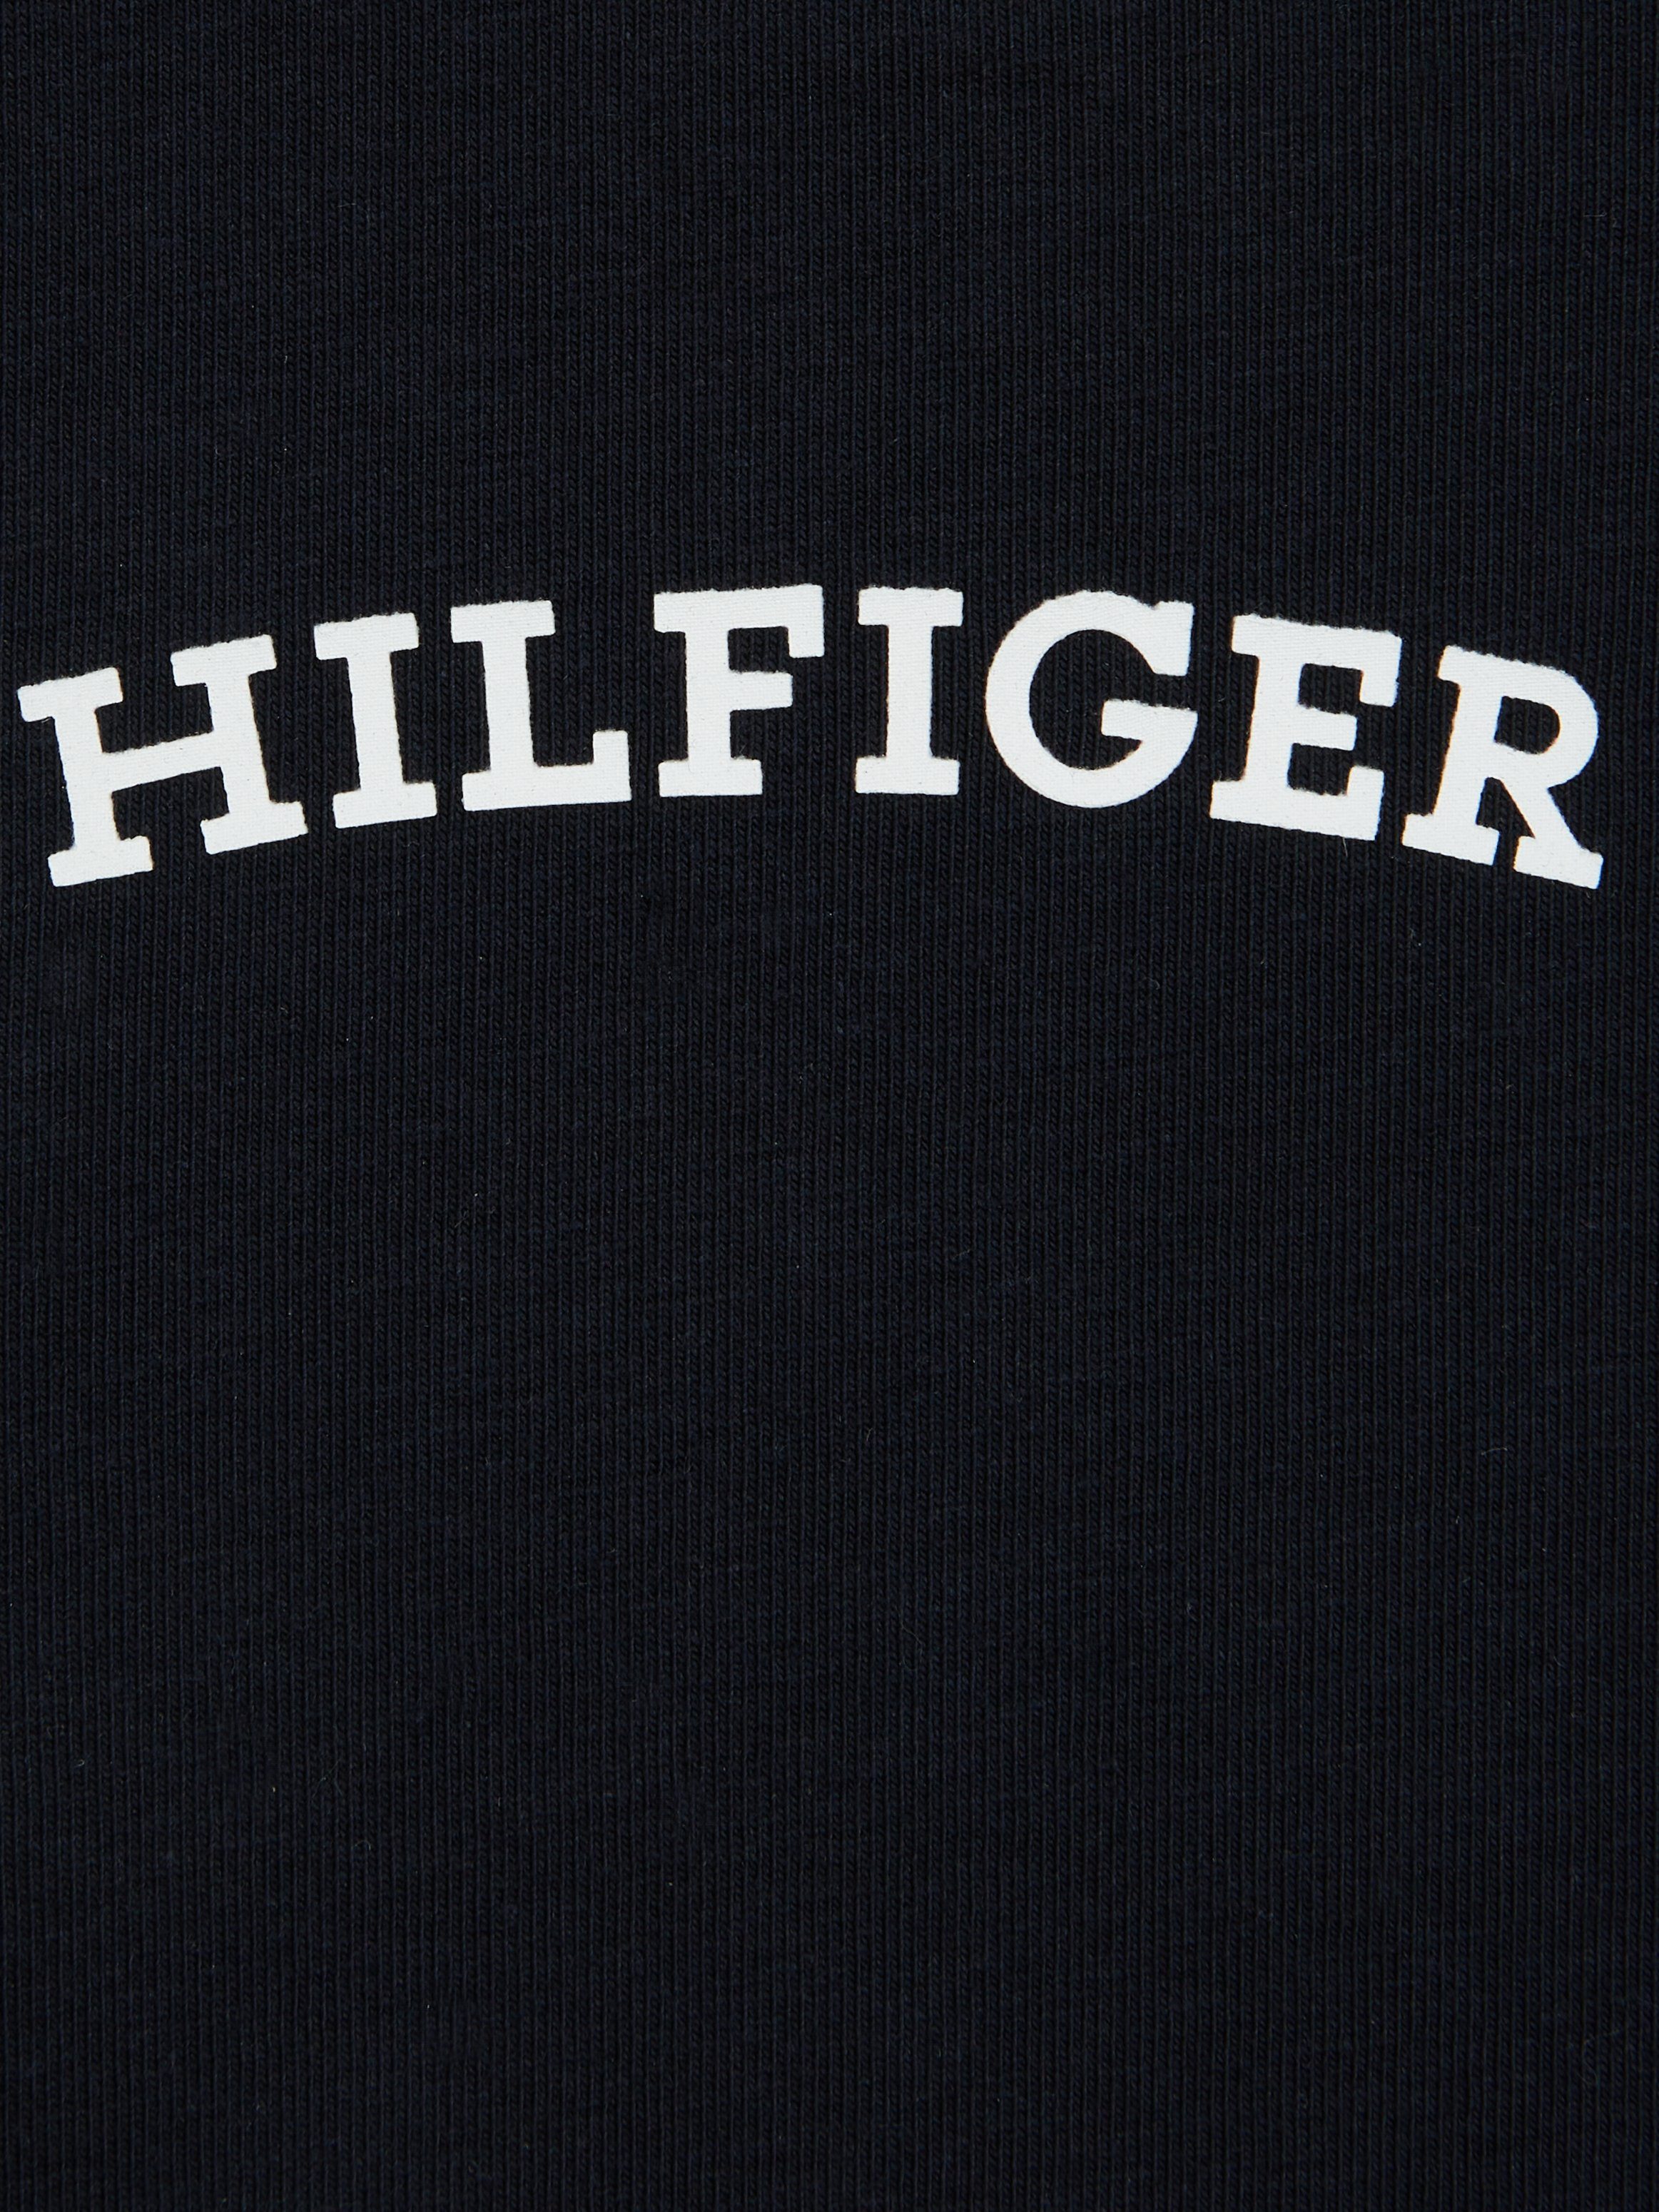 Tommy Hilfiger T-Shirt BABY CURVED MONOTYPE TEE S/S mit großem Hilfiger  Front Print & Logo-Flag | T-Shirts